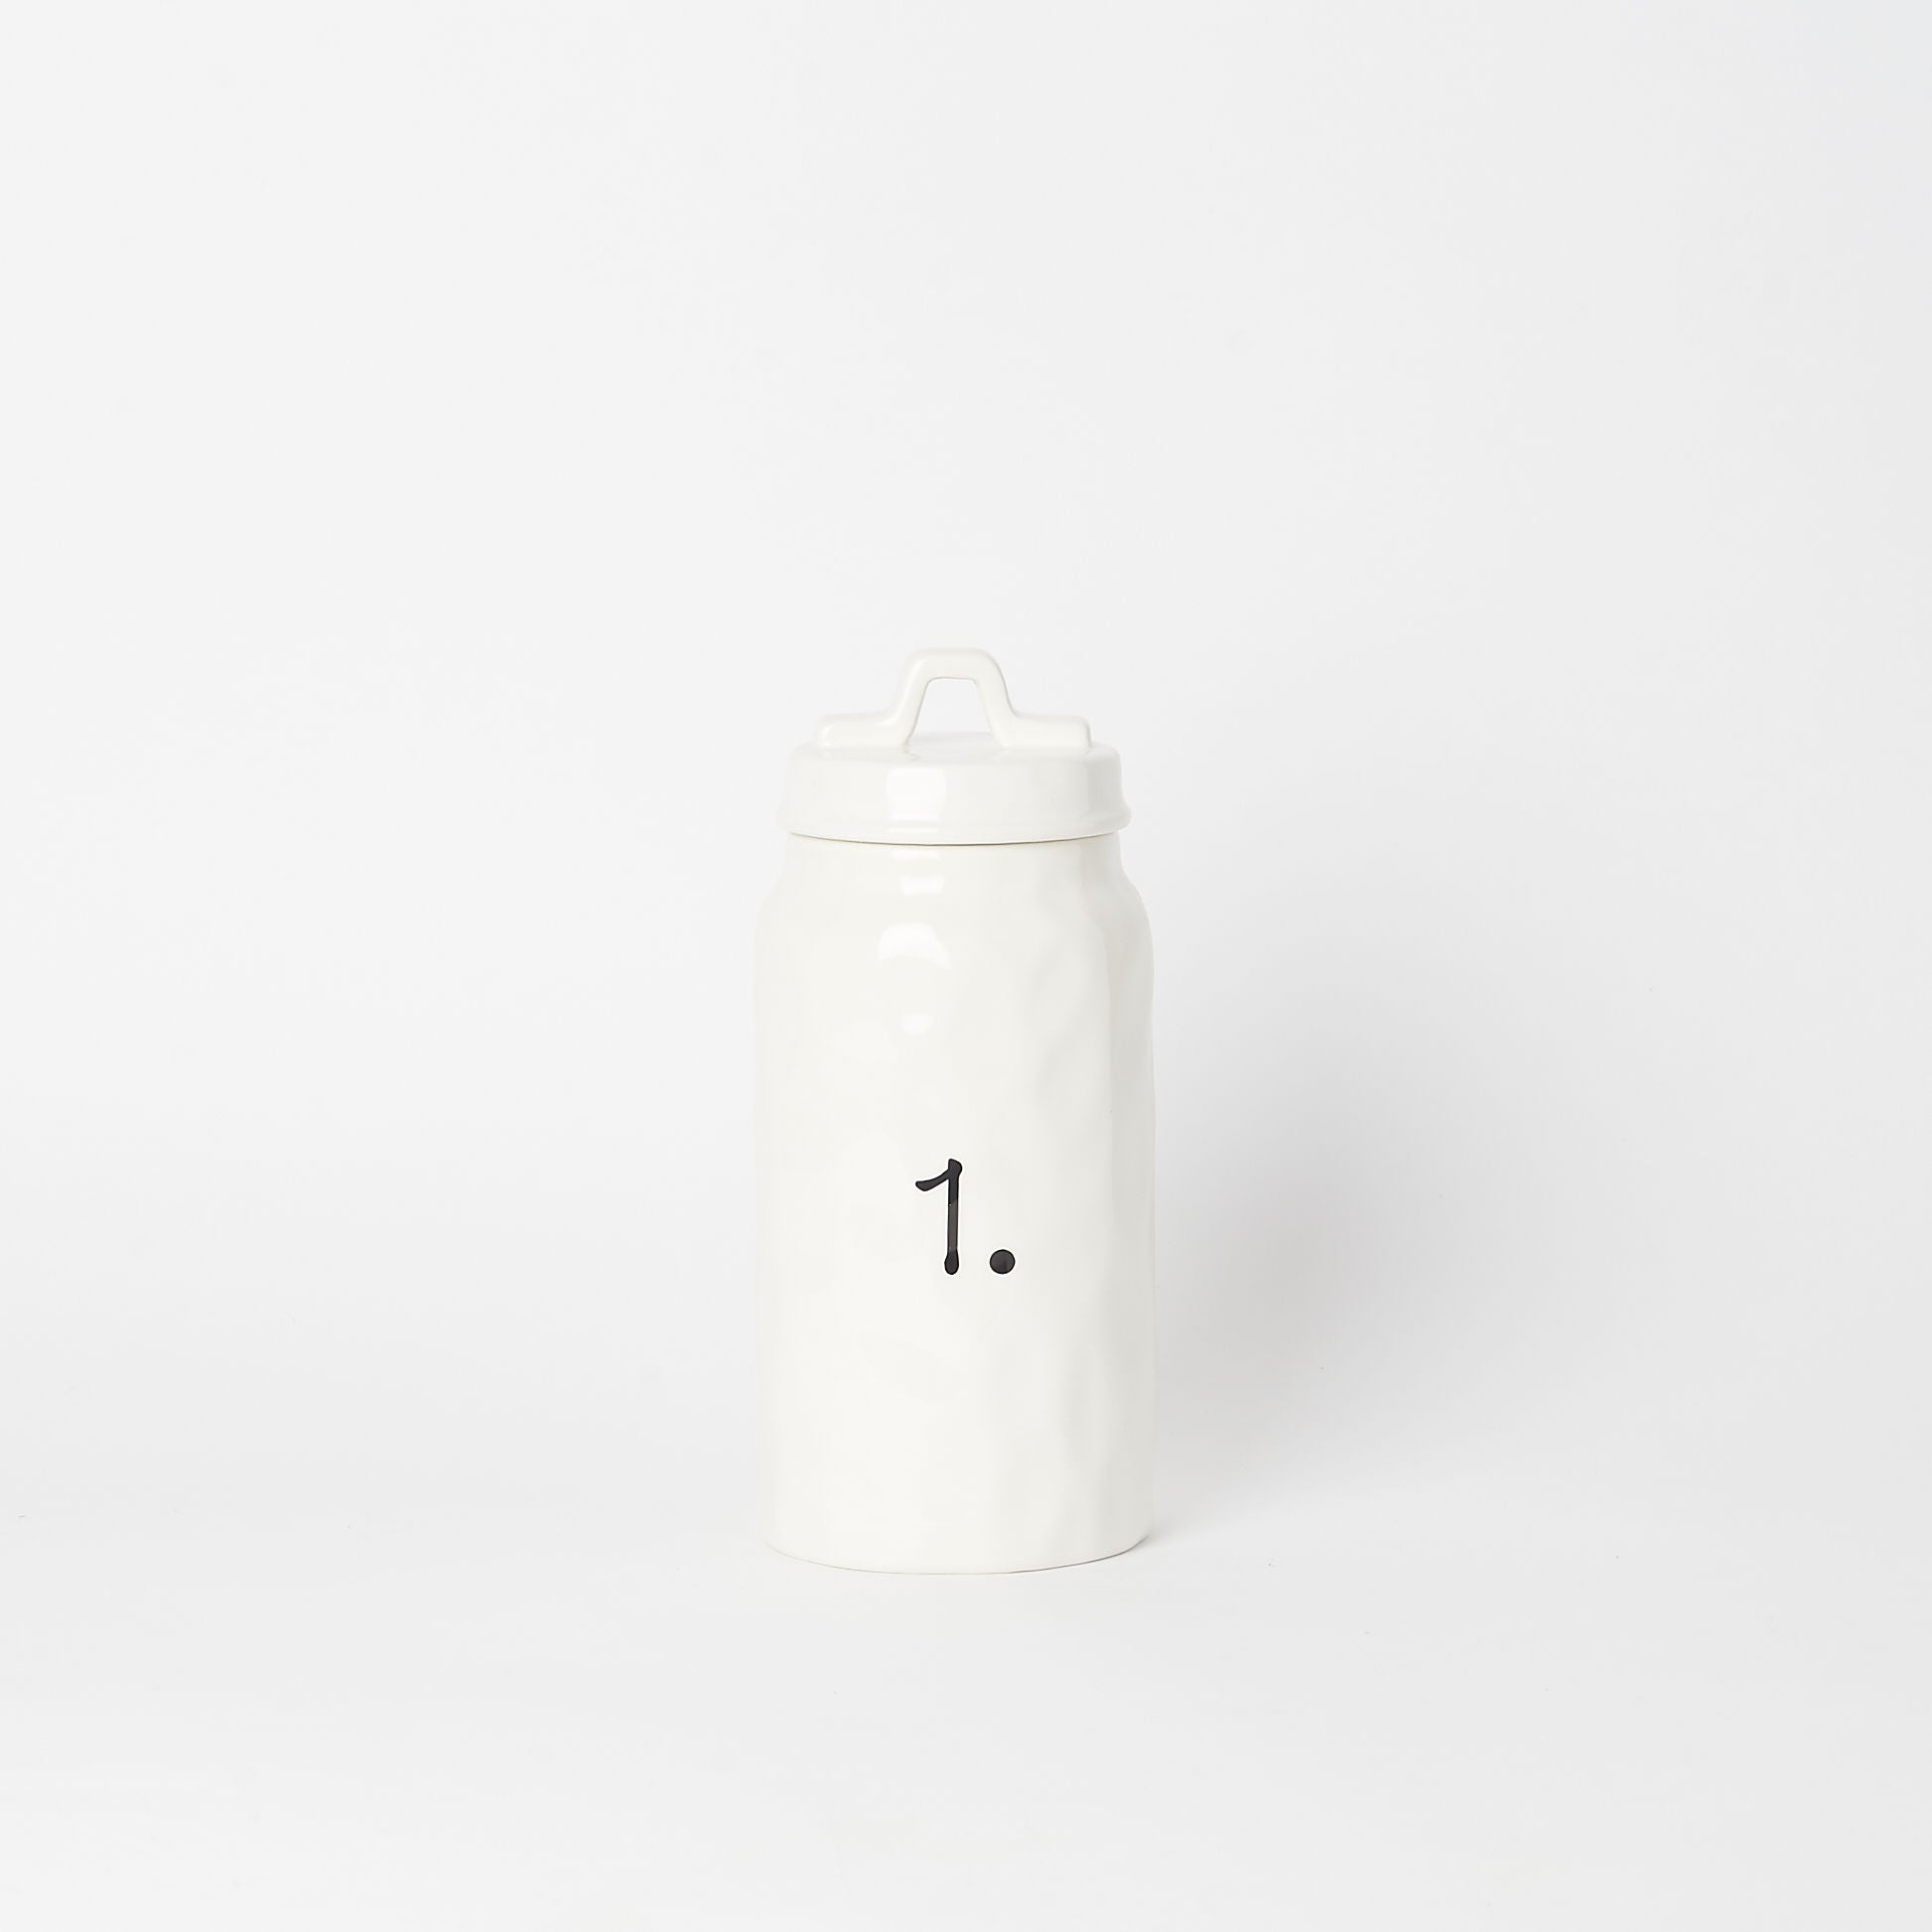 Ceramic Canisters (Set of 3)